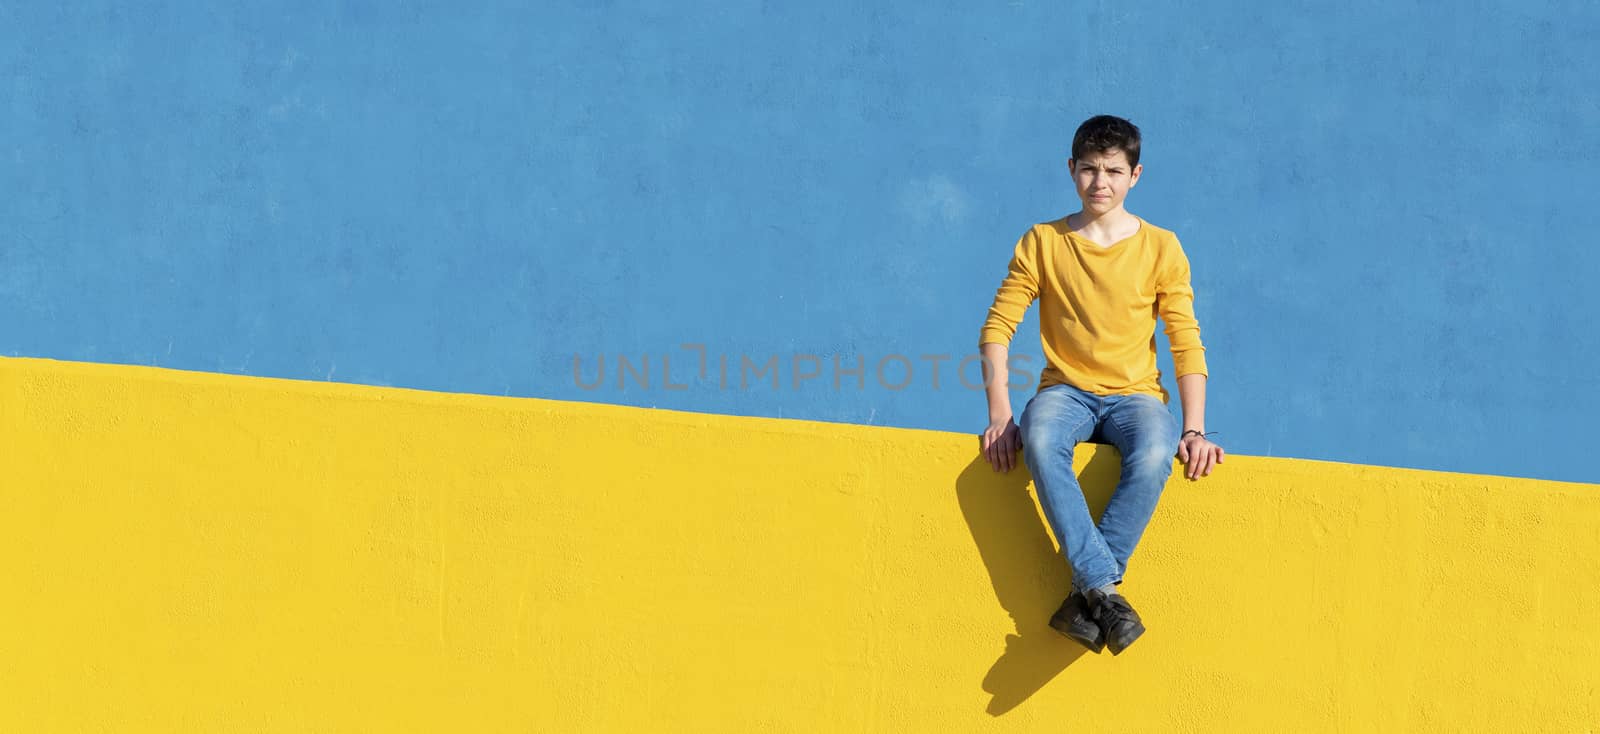 Front view of a young boy wearing casual clothes sitting on a yellow fence against a blue wall in a sunny day by raferto1973